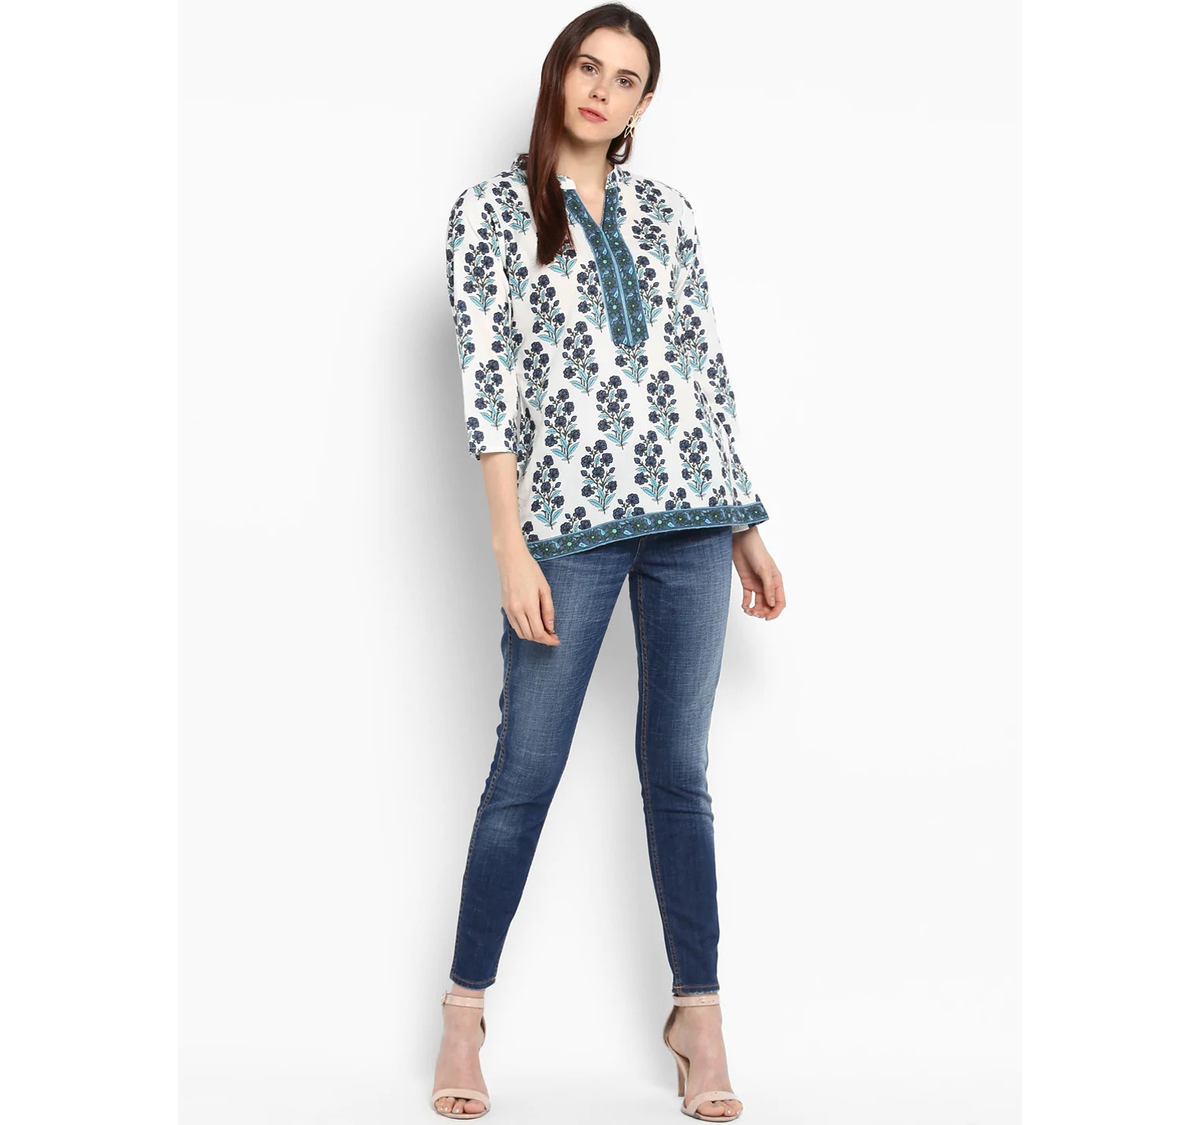 Women's  Off-White Printed A-Line Top1 - Wahe-NOOR